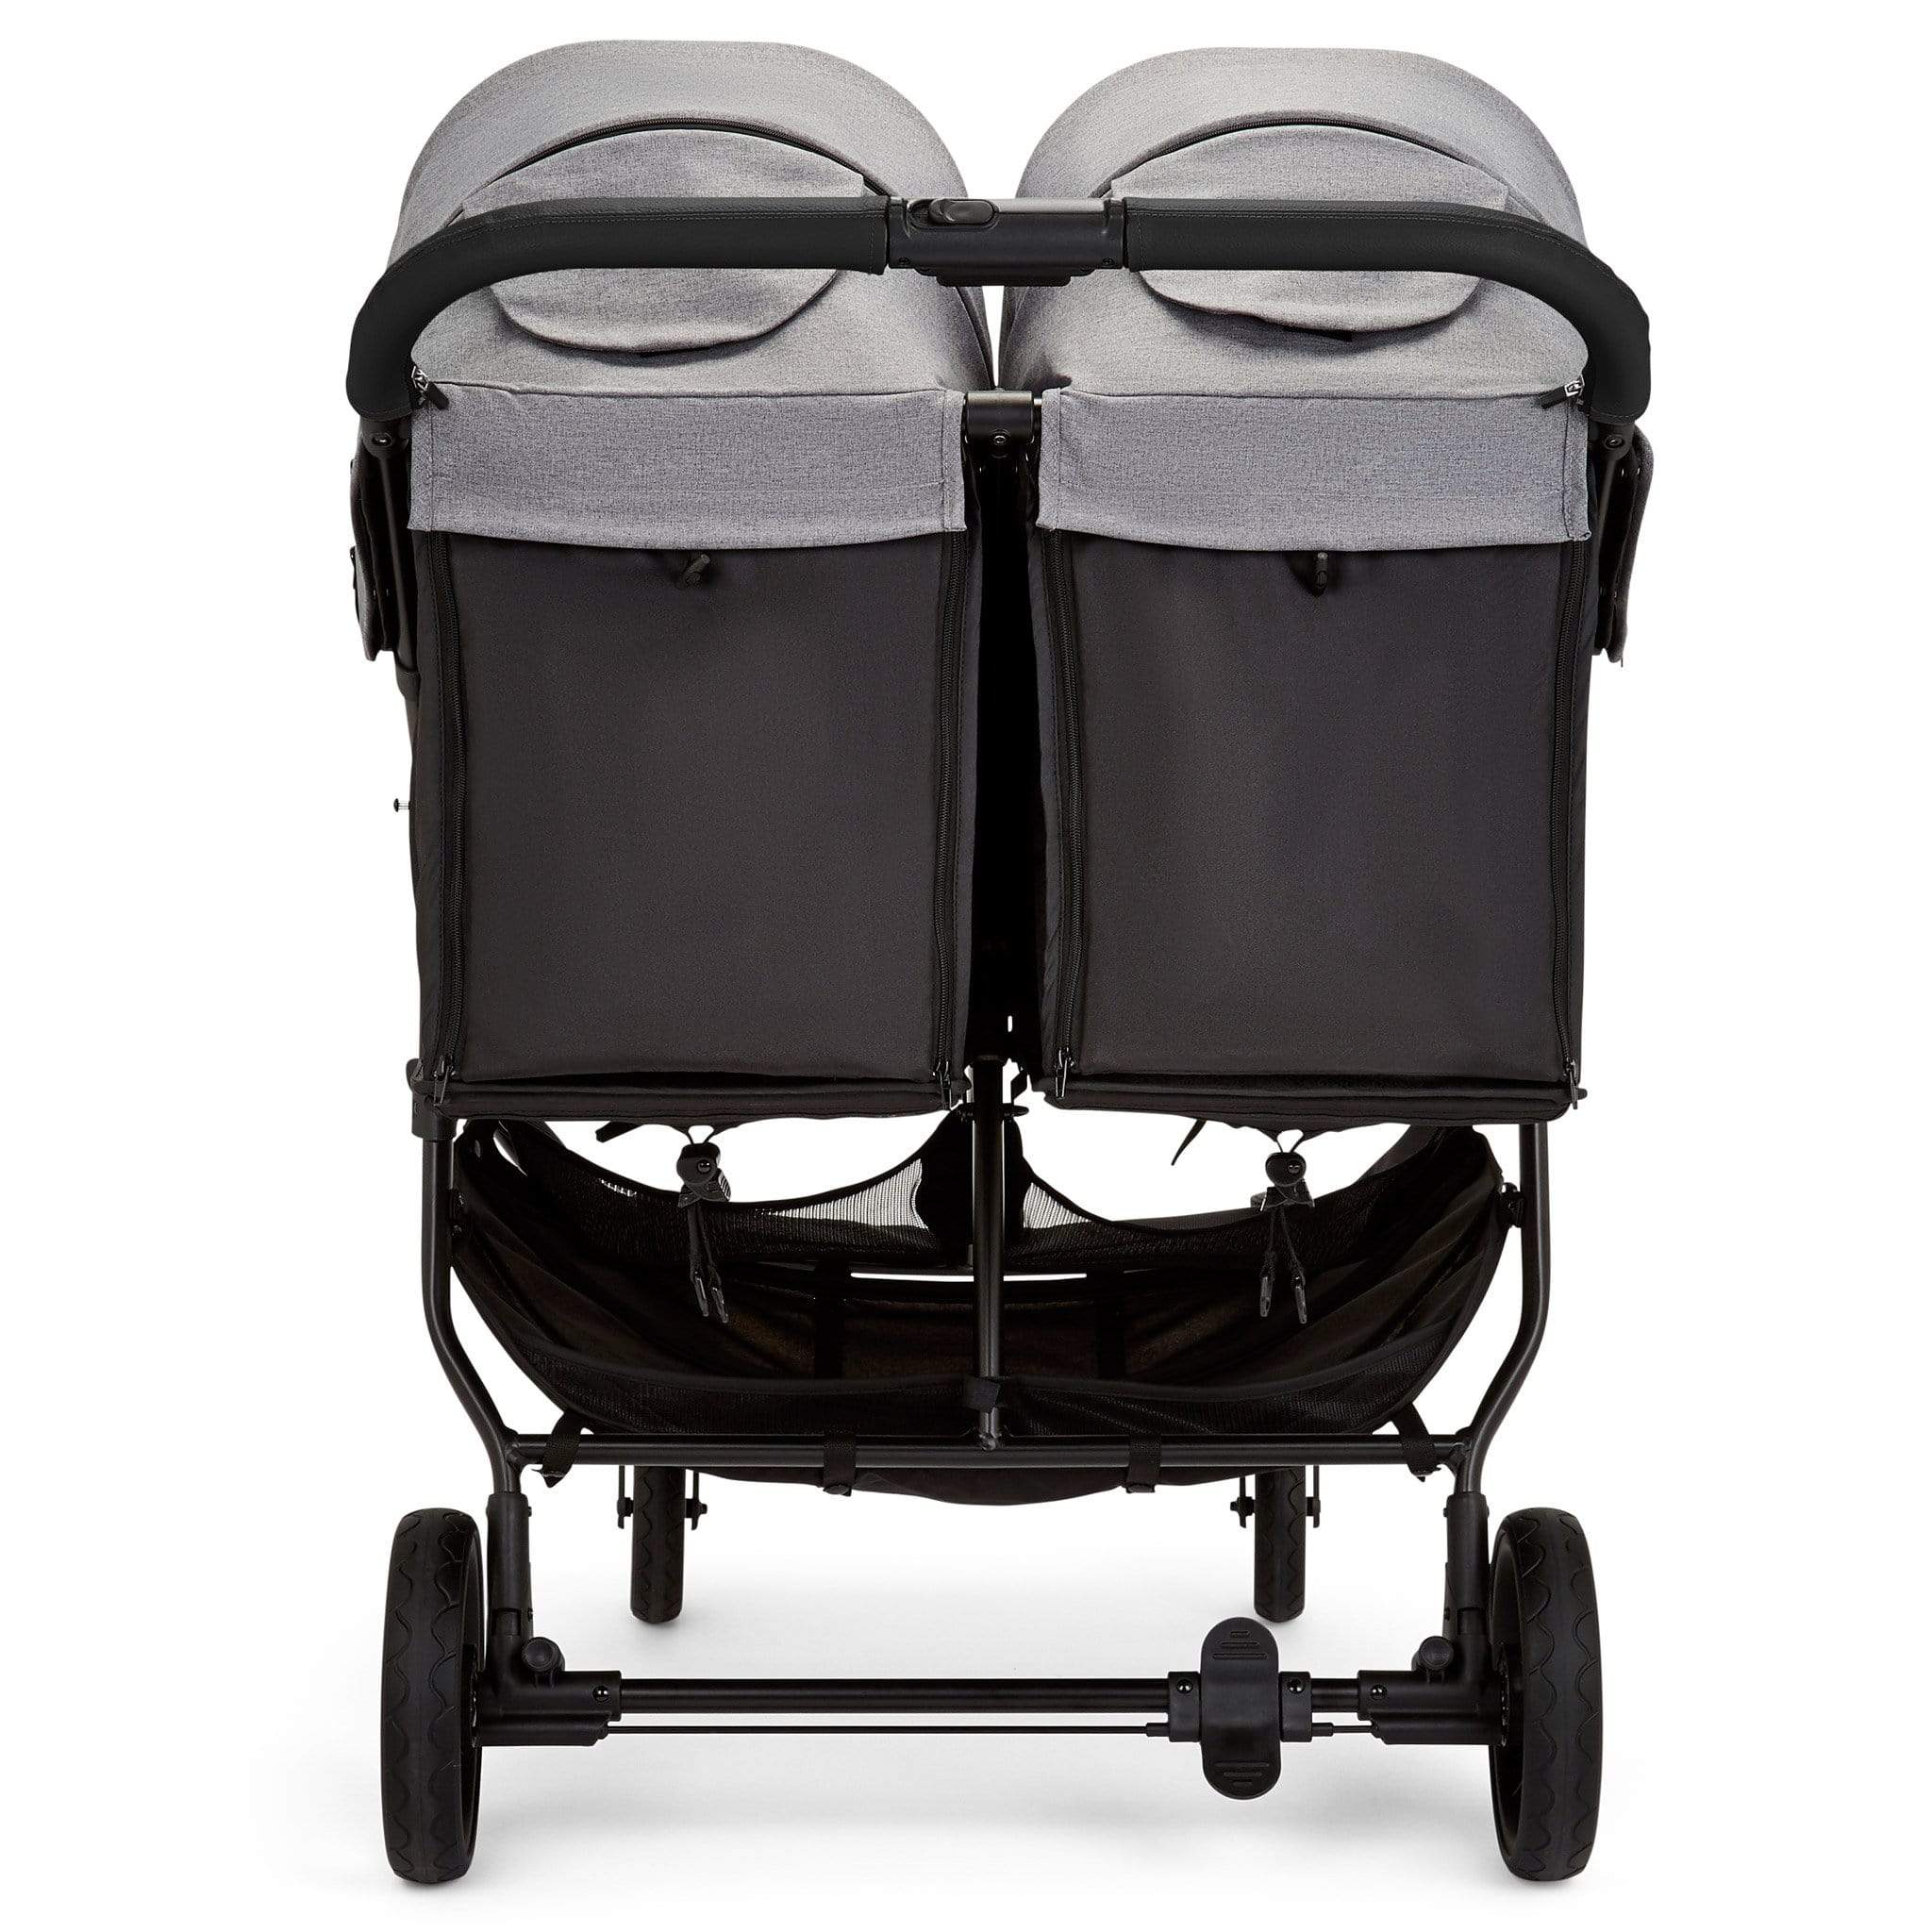 Ickle Bubba double buggies Ickle Bubba Venus Double Stroller Black/Space Grey/Black 16-004-100-014